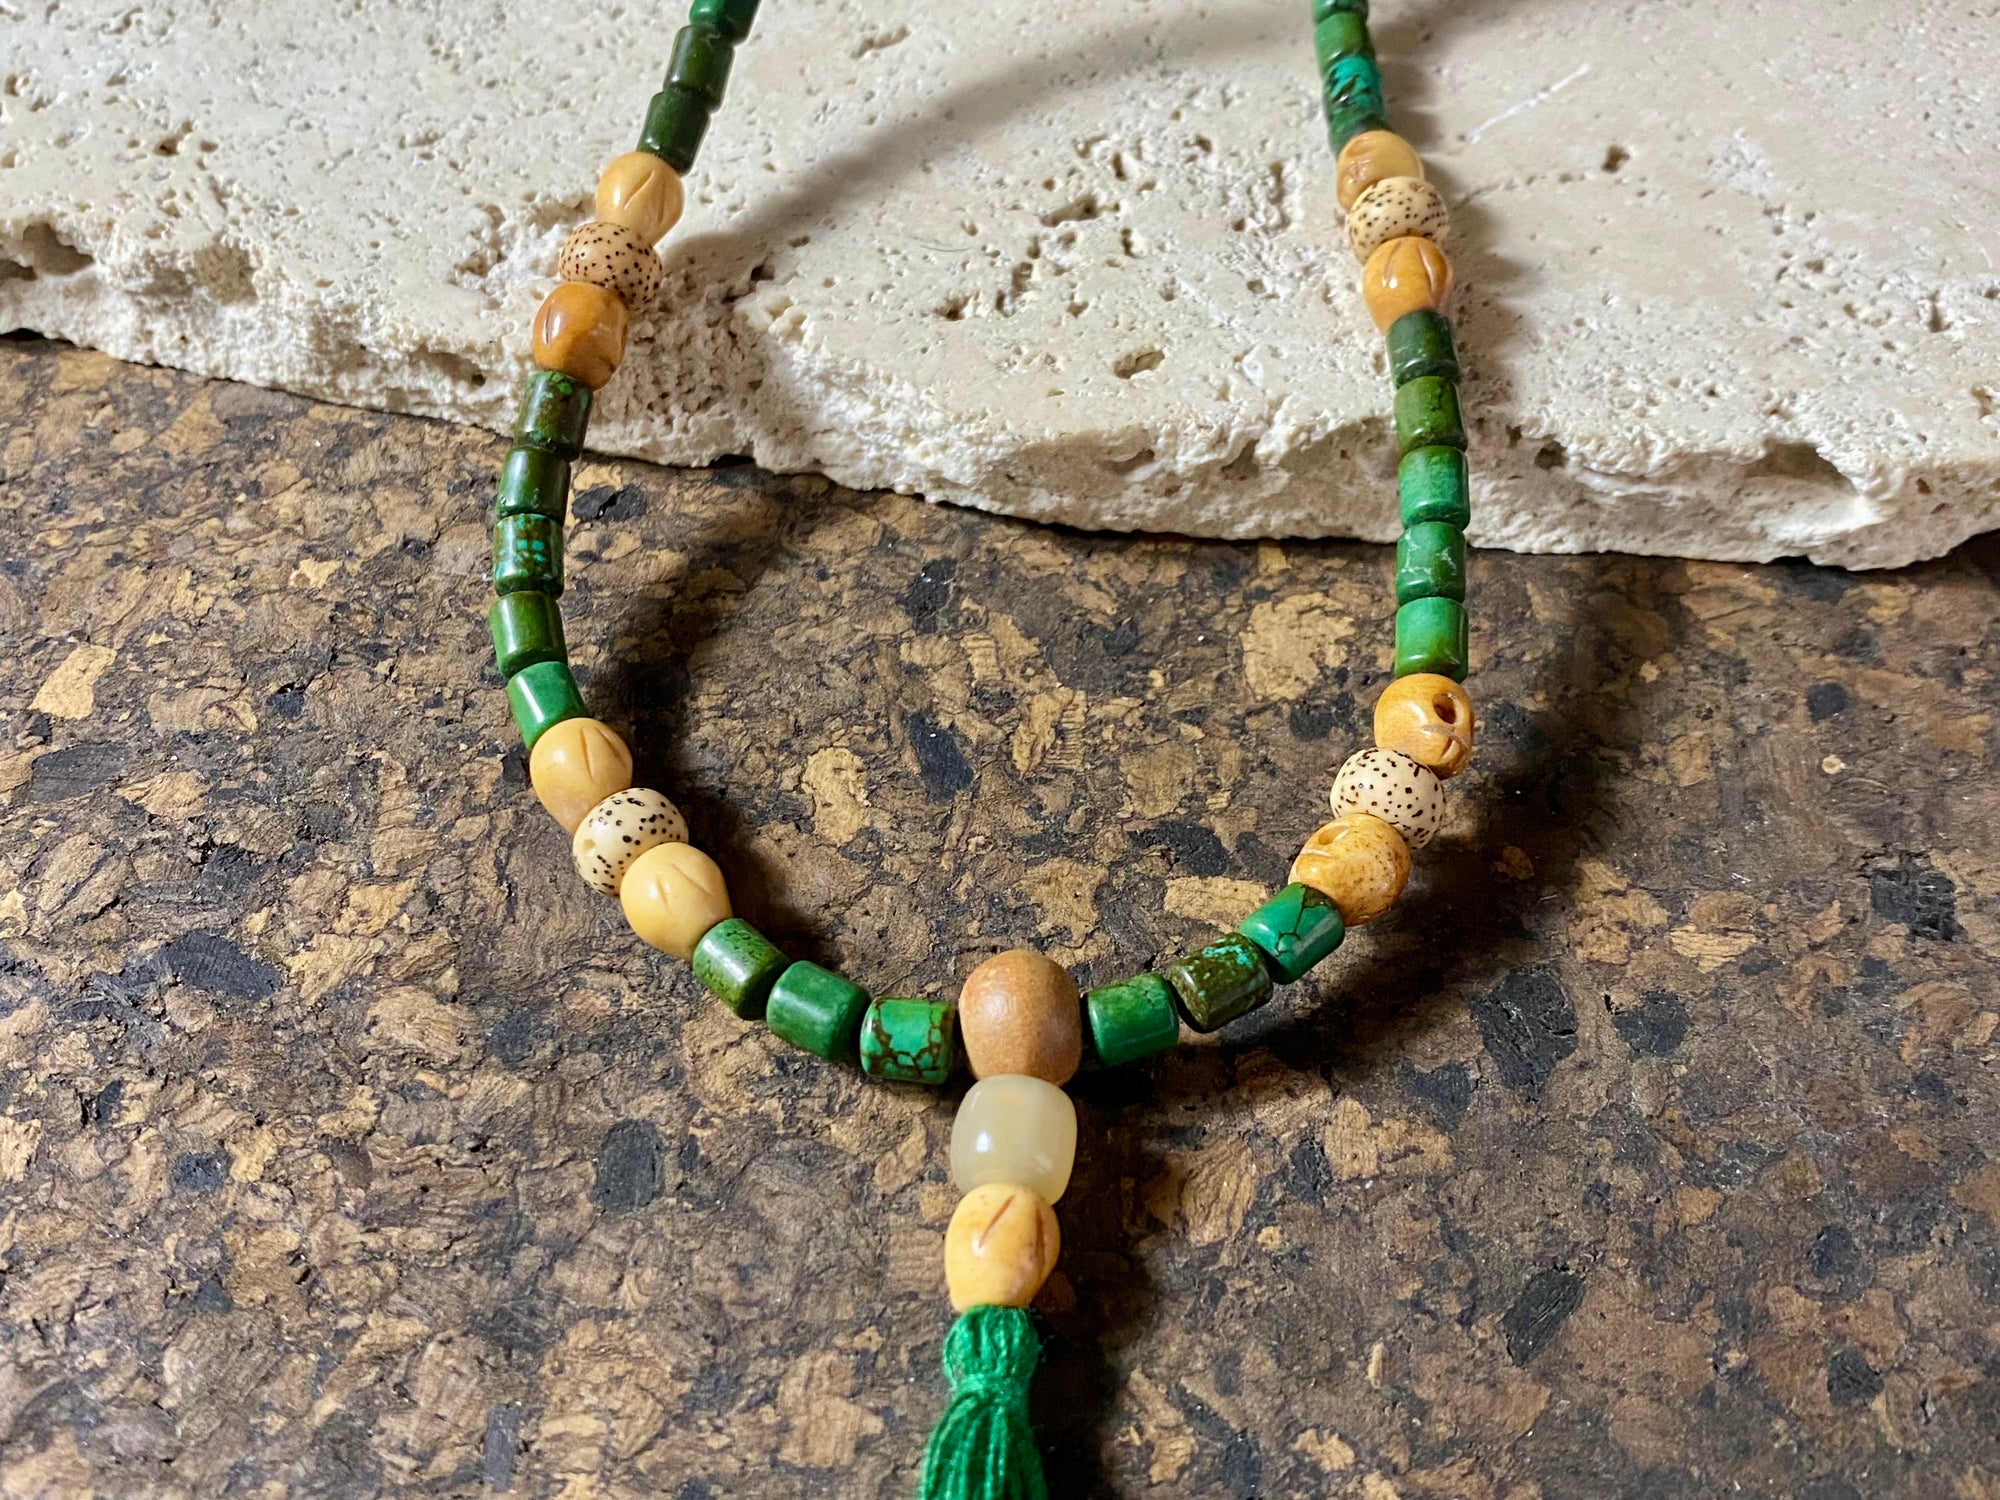 Our luxurious Buddhist mala contains 108 beads and has a beautifully organic look and feel. It's made from dark green turquoise beads, skull carved yak bone beads and lotus root beads, all finished with a sandalwood guru bead and a yak horn bead. Finished with a dark green tassel.